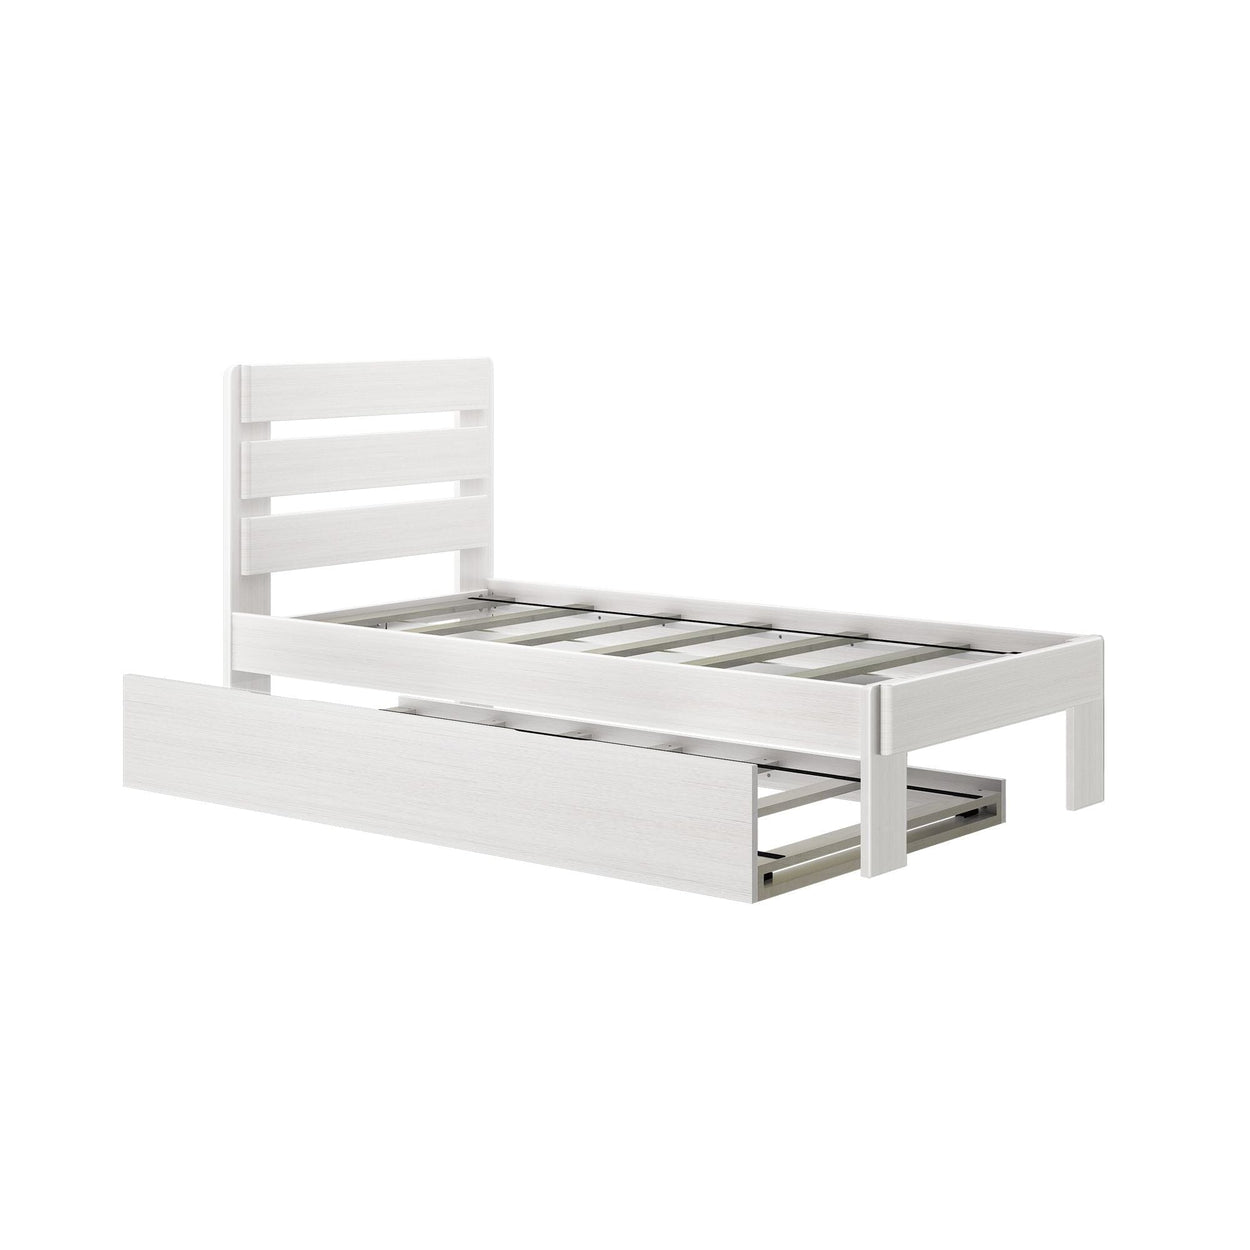 196210-182 : Kids Beds Farmhouse Twin Bed with Plank Headboard and Trundle, White Wash